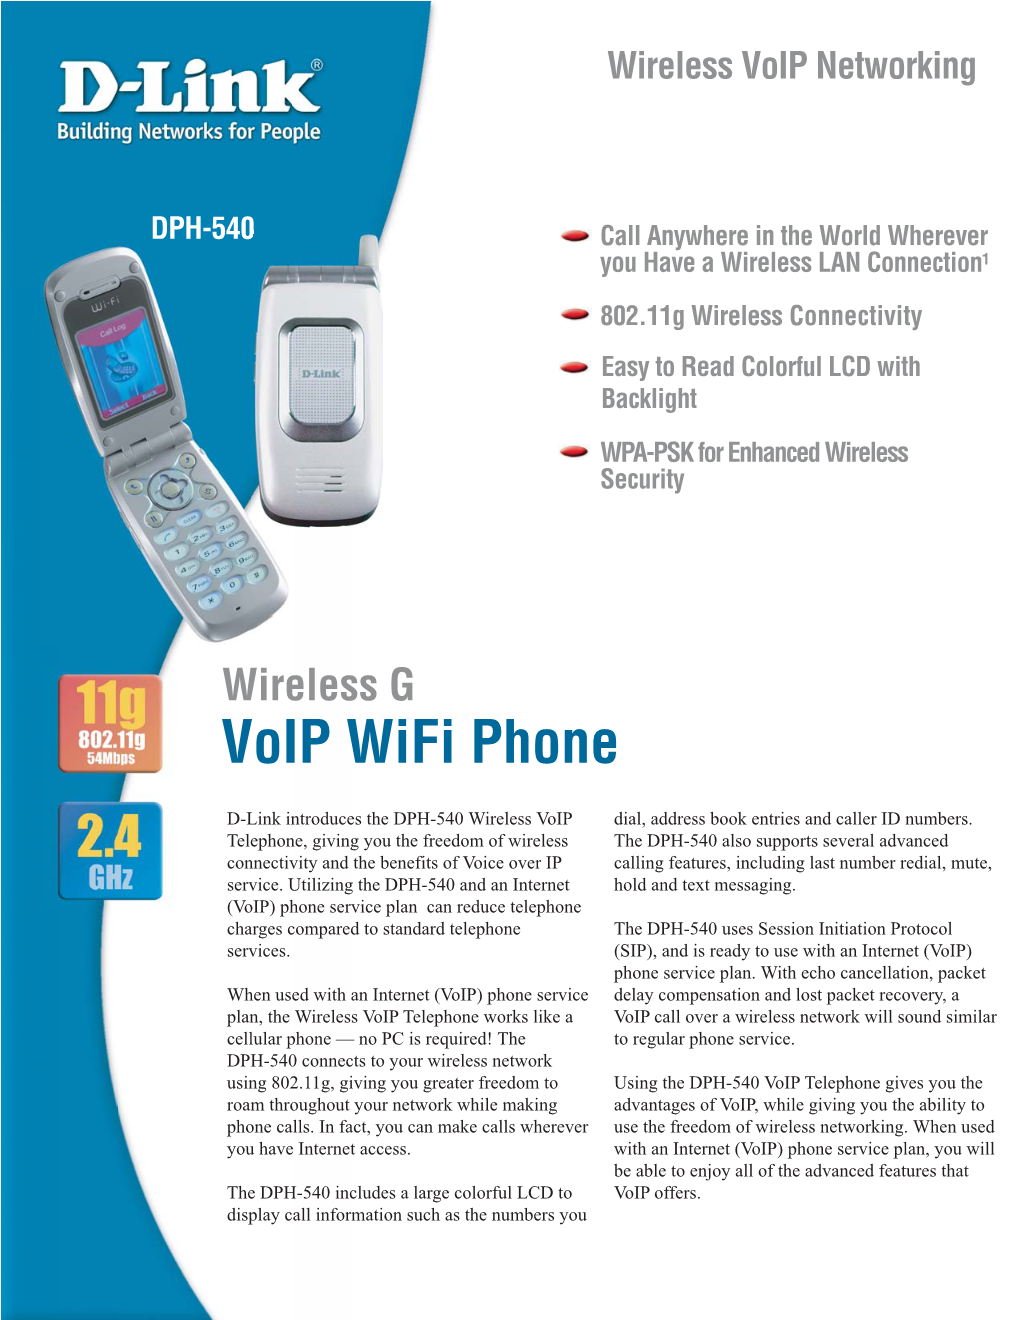 DPH-540 Call Anywhere in the World Wherever You Have a Wireless LAN Connection1